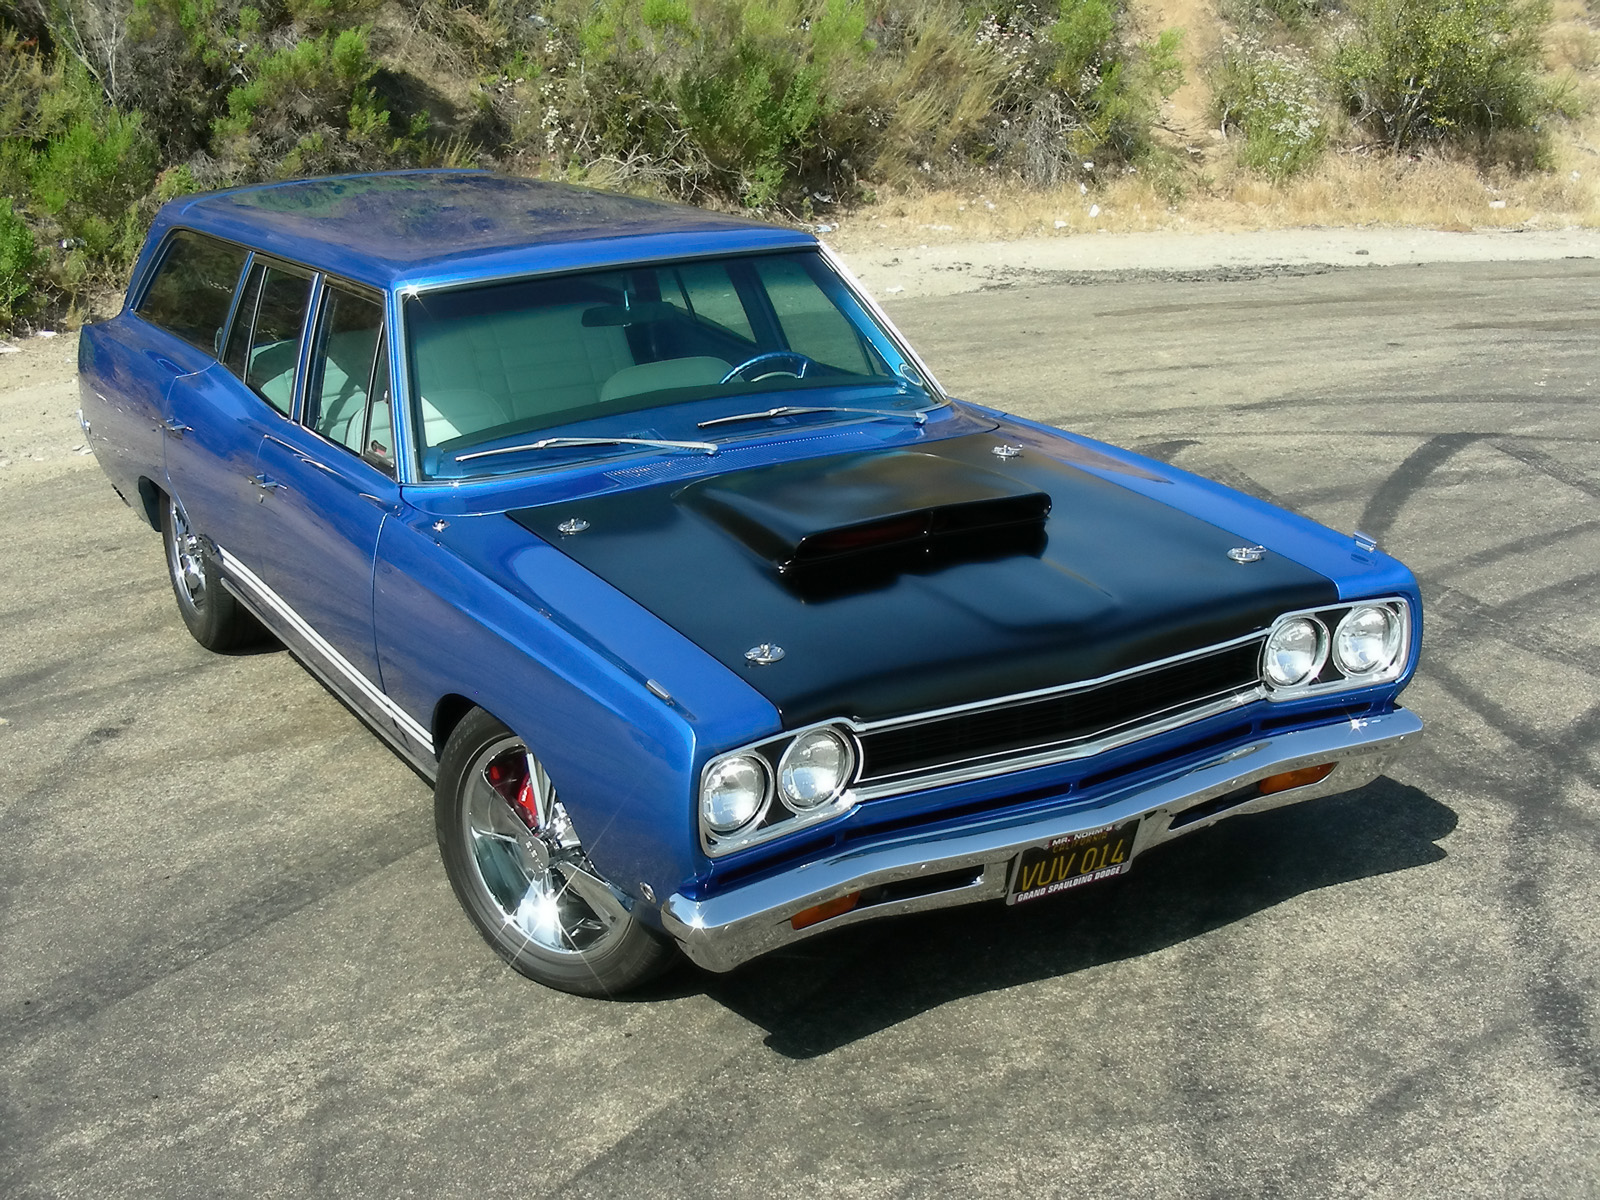 1968, Plymouth, Gtx, 440, Six pack, Stationwagon, Classic, Muscle, Tuning, Hot, Rod, Rods Wallpaper